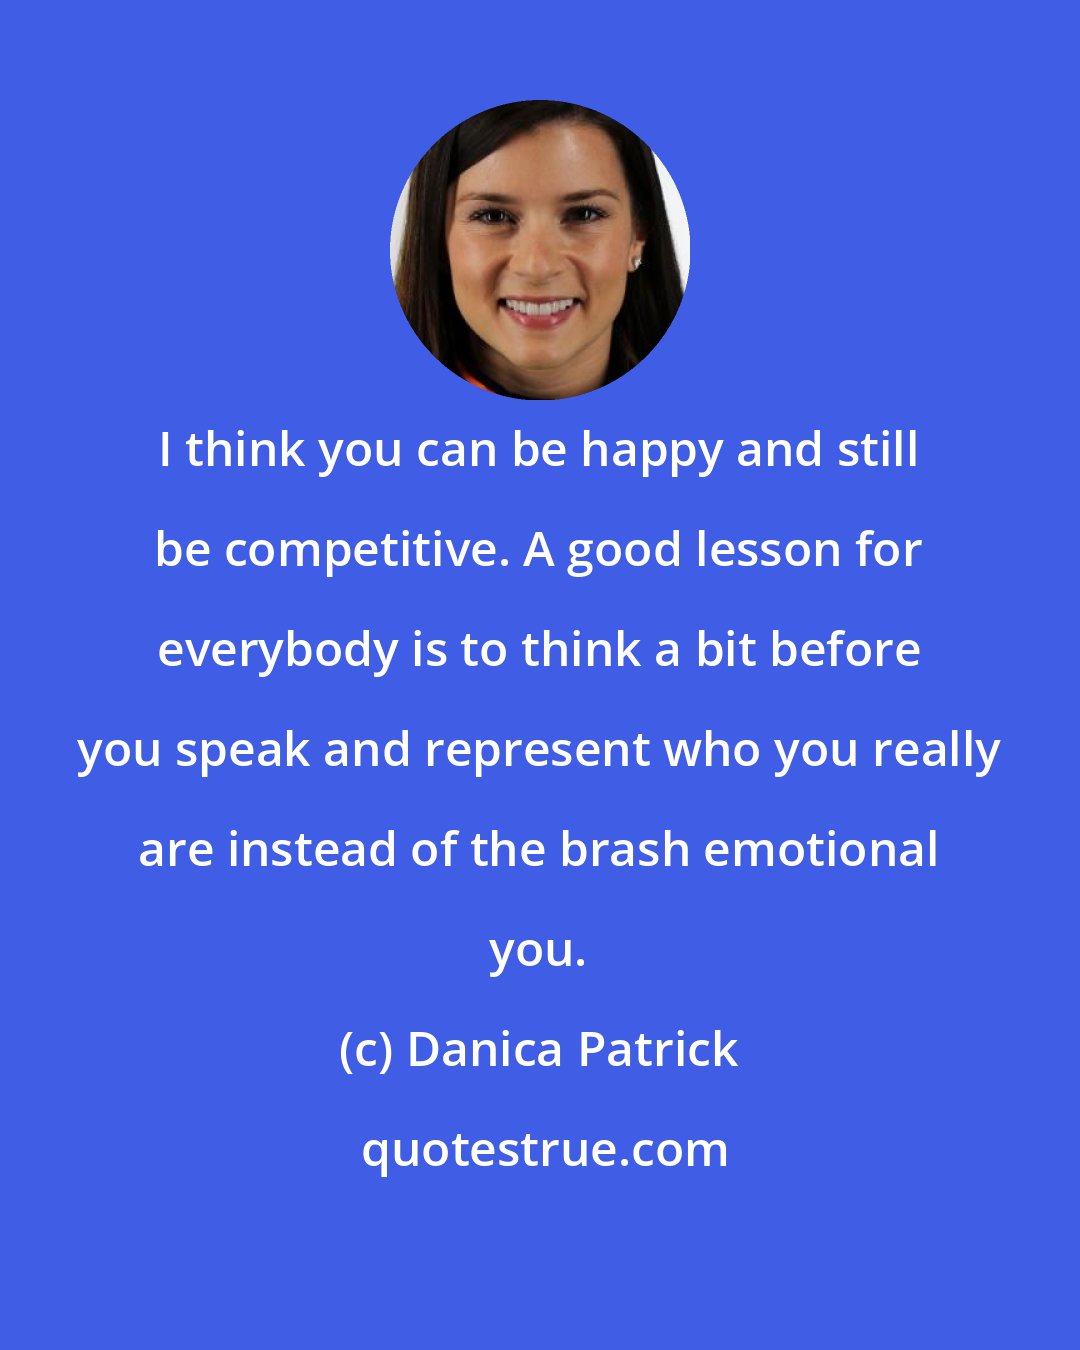 Danica Patrick: I think you can be happy and still be competitive. A good lesson for everybody is to think a bit before you speak and represent who you really are instead of the brash emotional you.